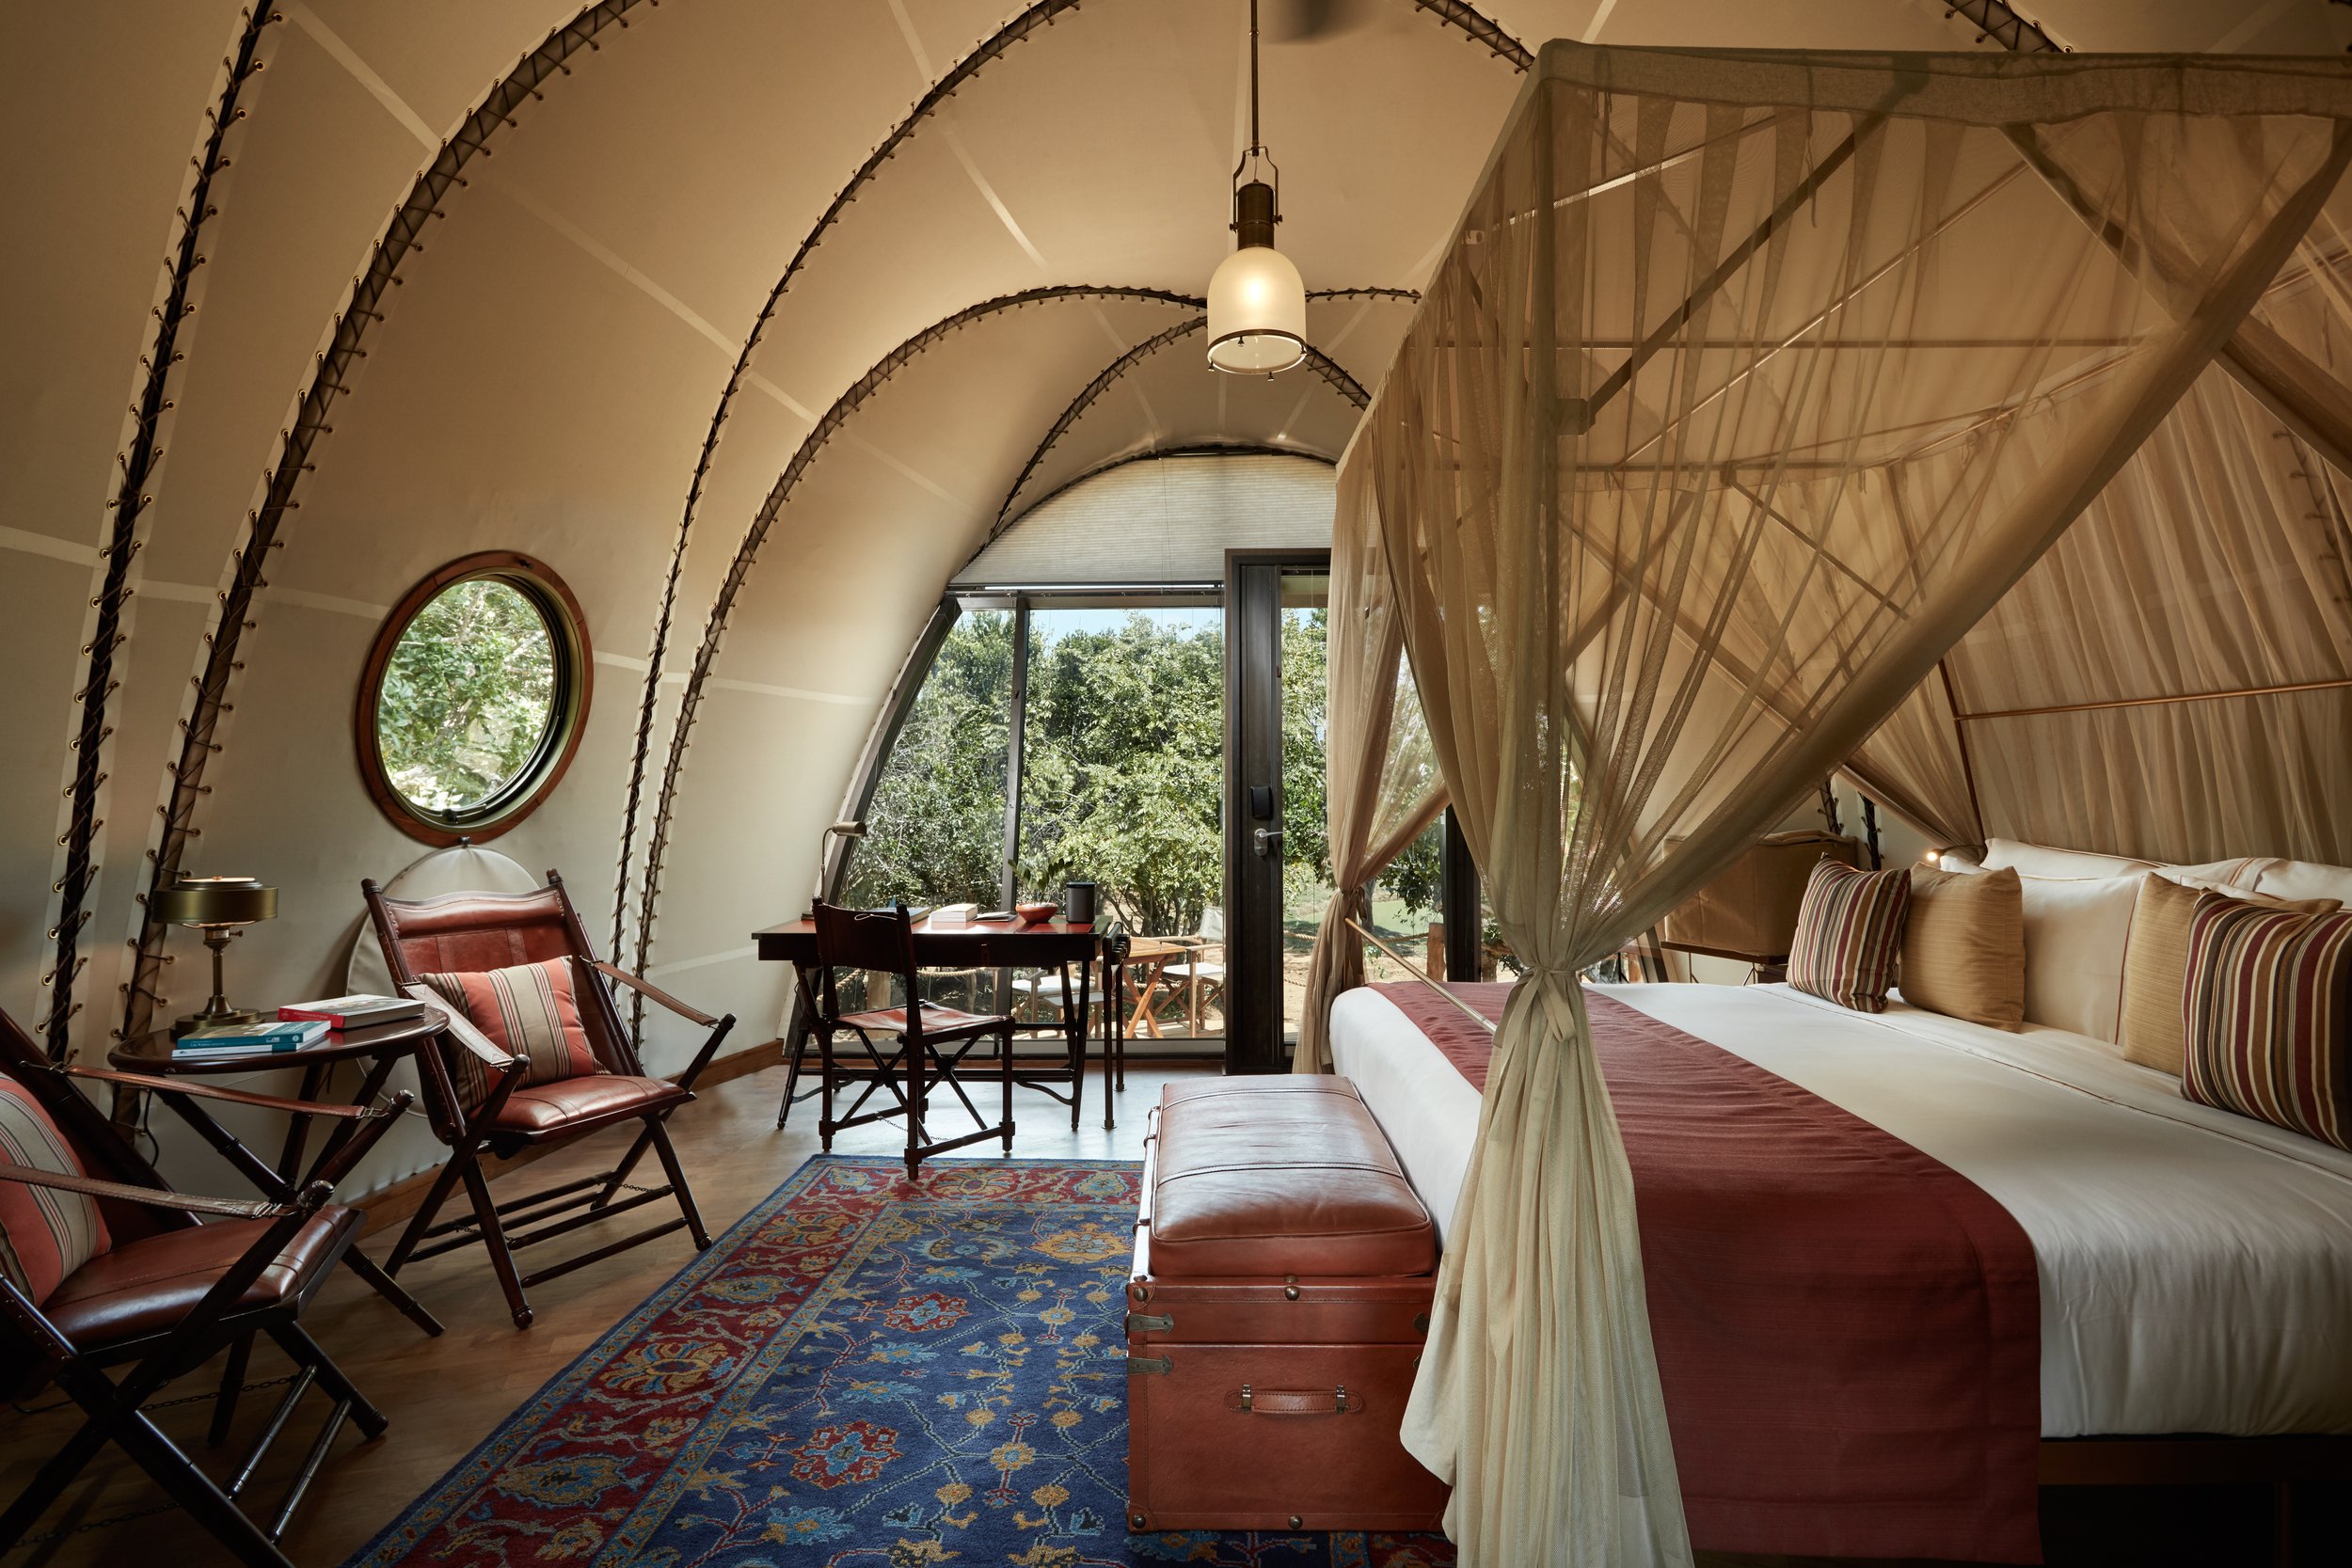 Cocoon Style Tented Accommodation at Wild Coast Lodge